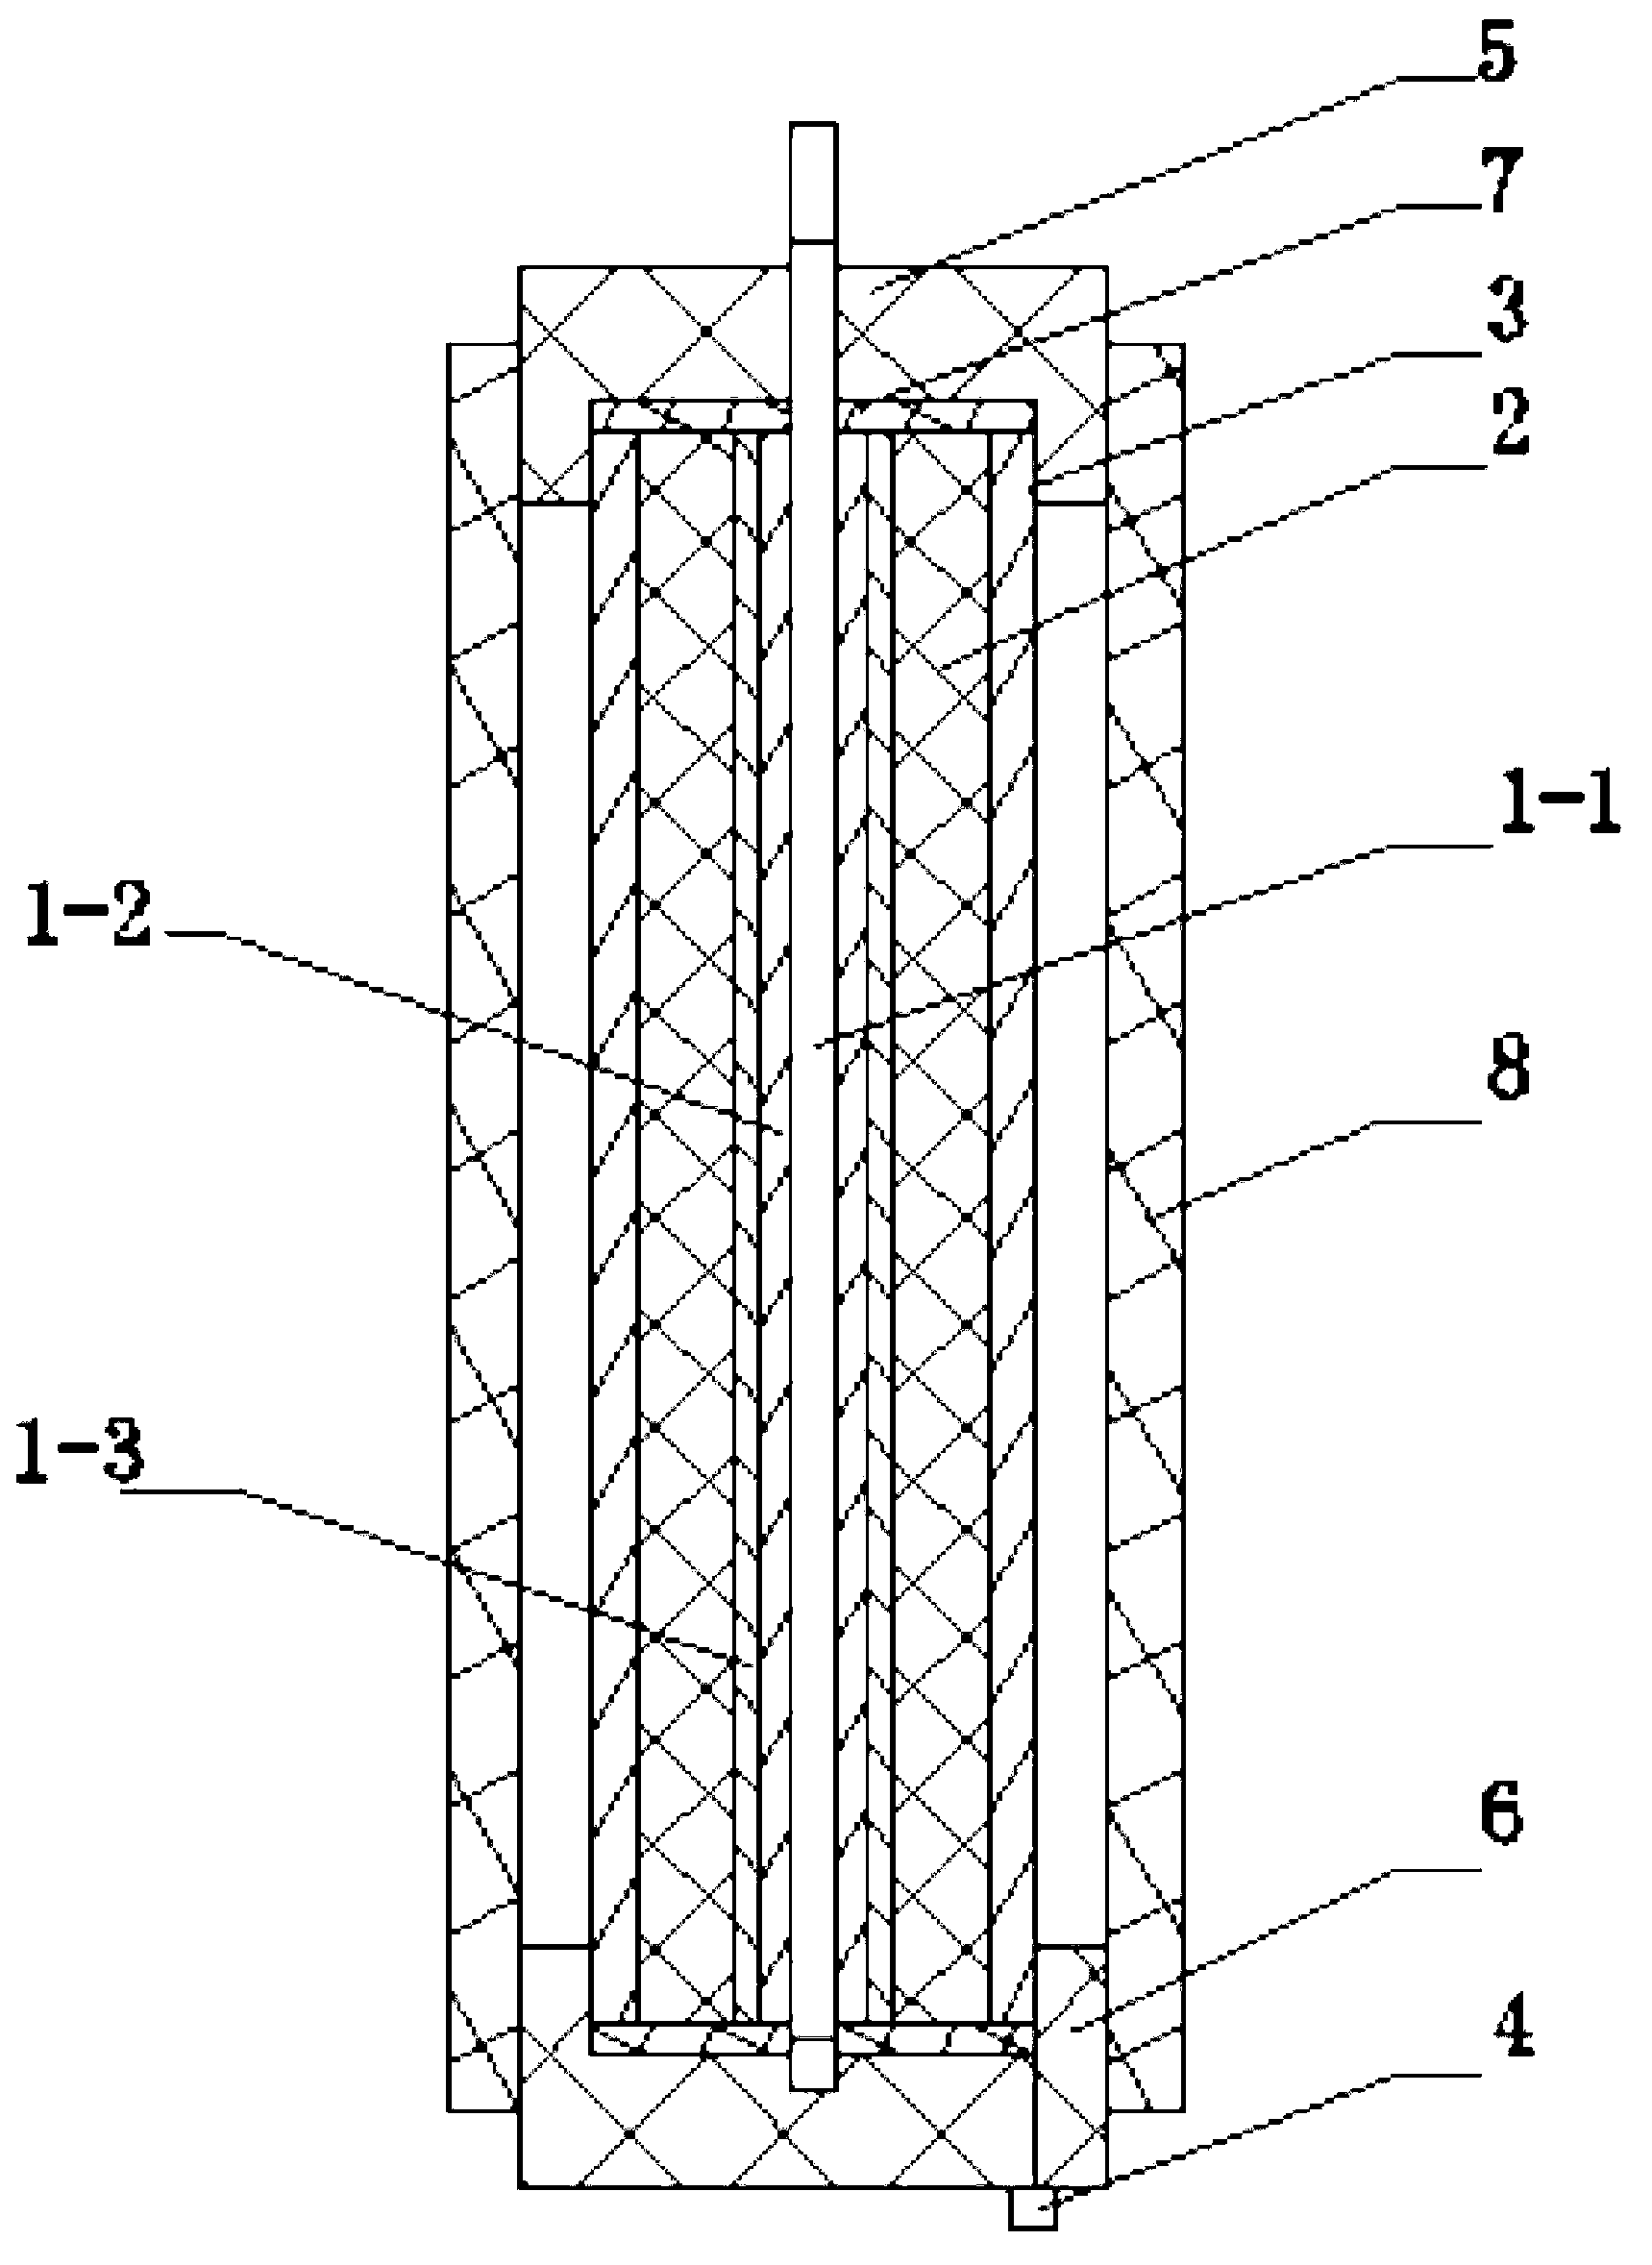 Spirally wound lithium-air solid state battery with replaceable electrodes